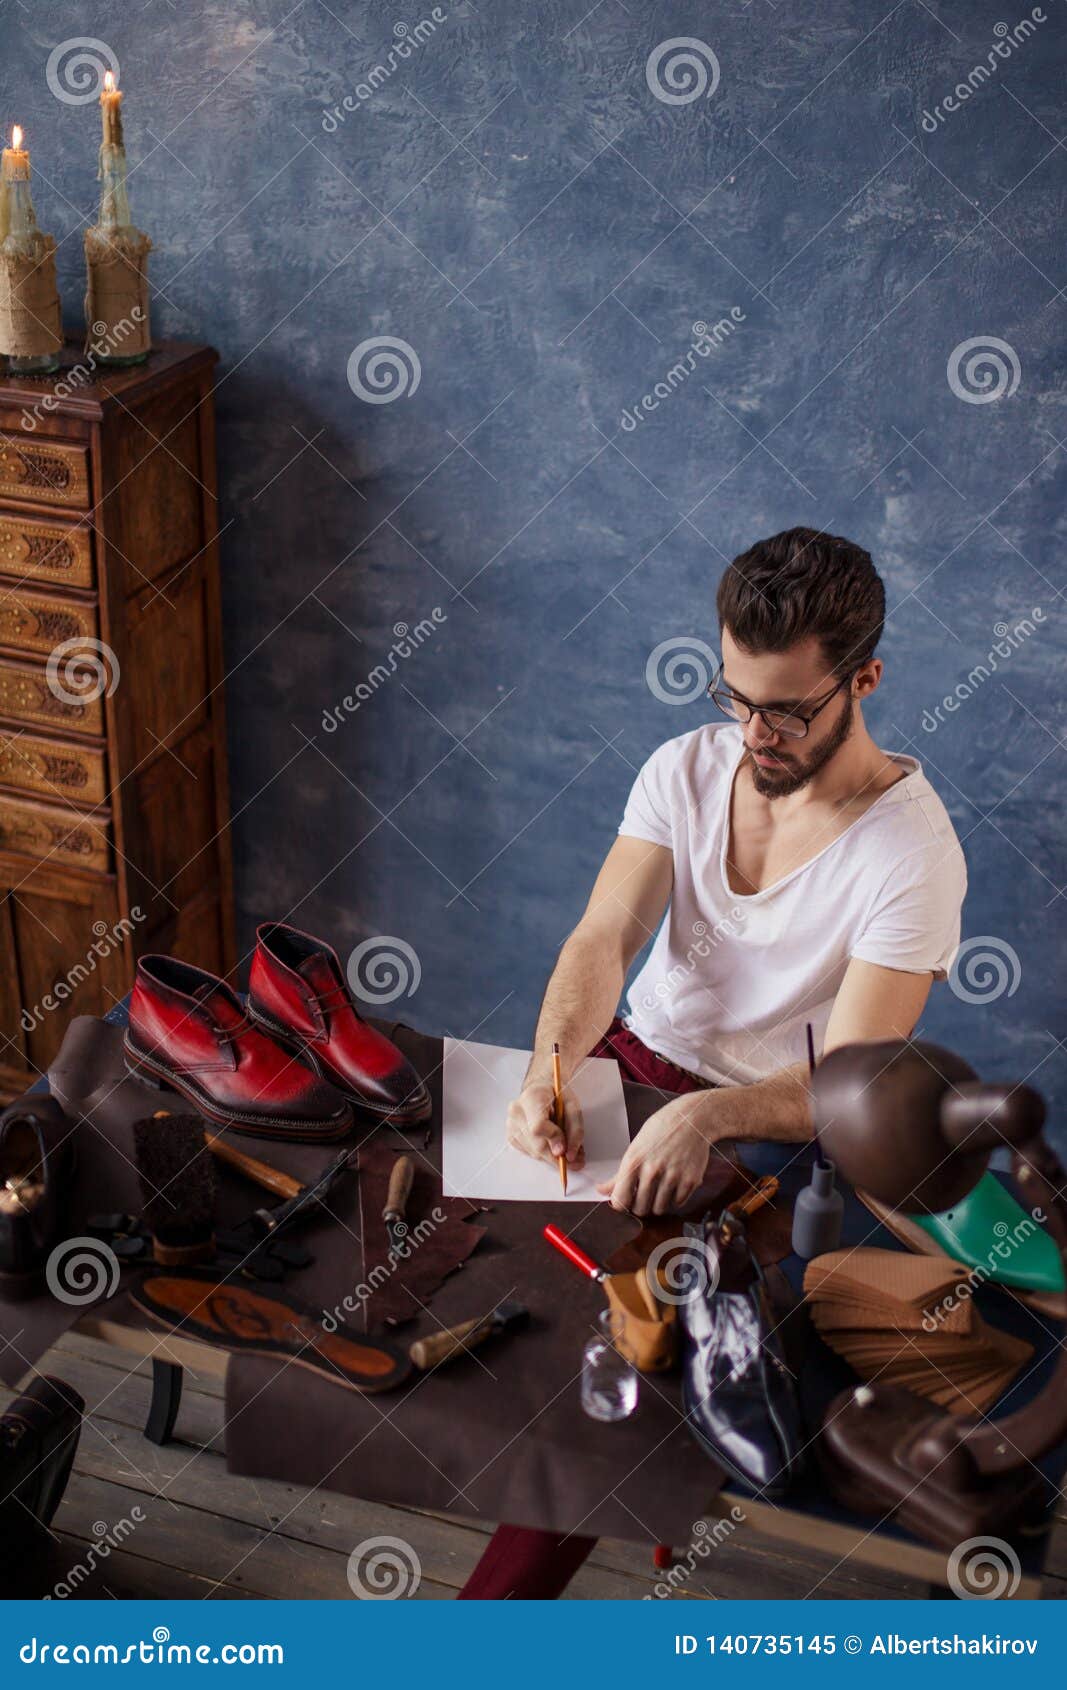 Student Earning Money after Studing at the University Stock Image